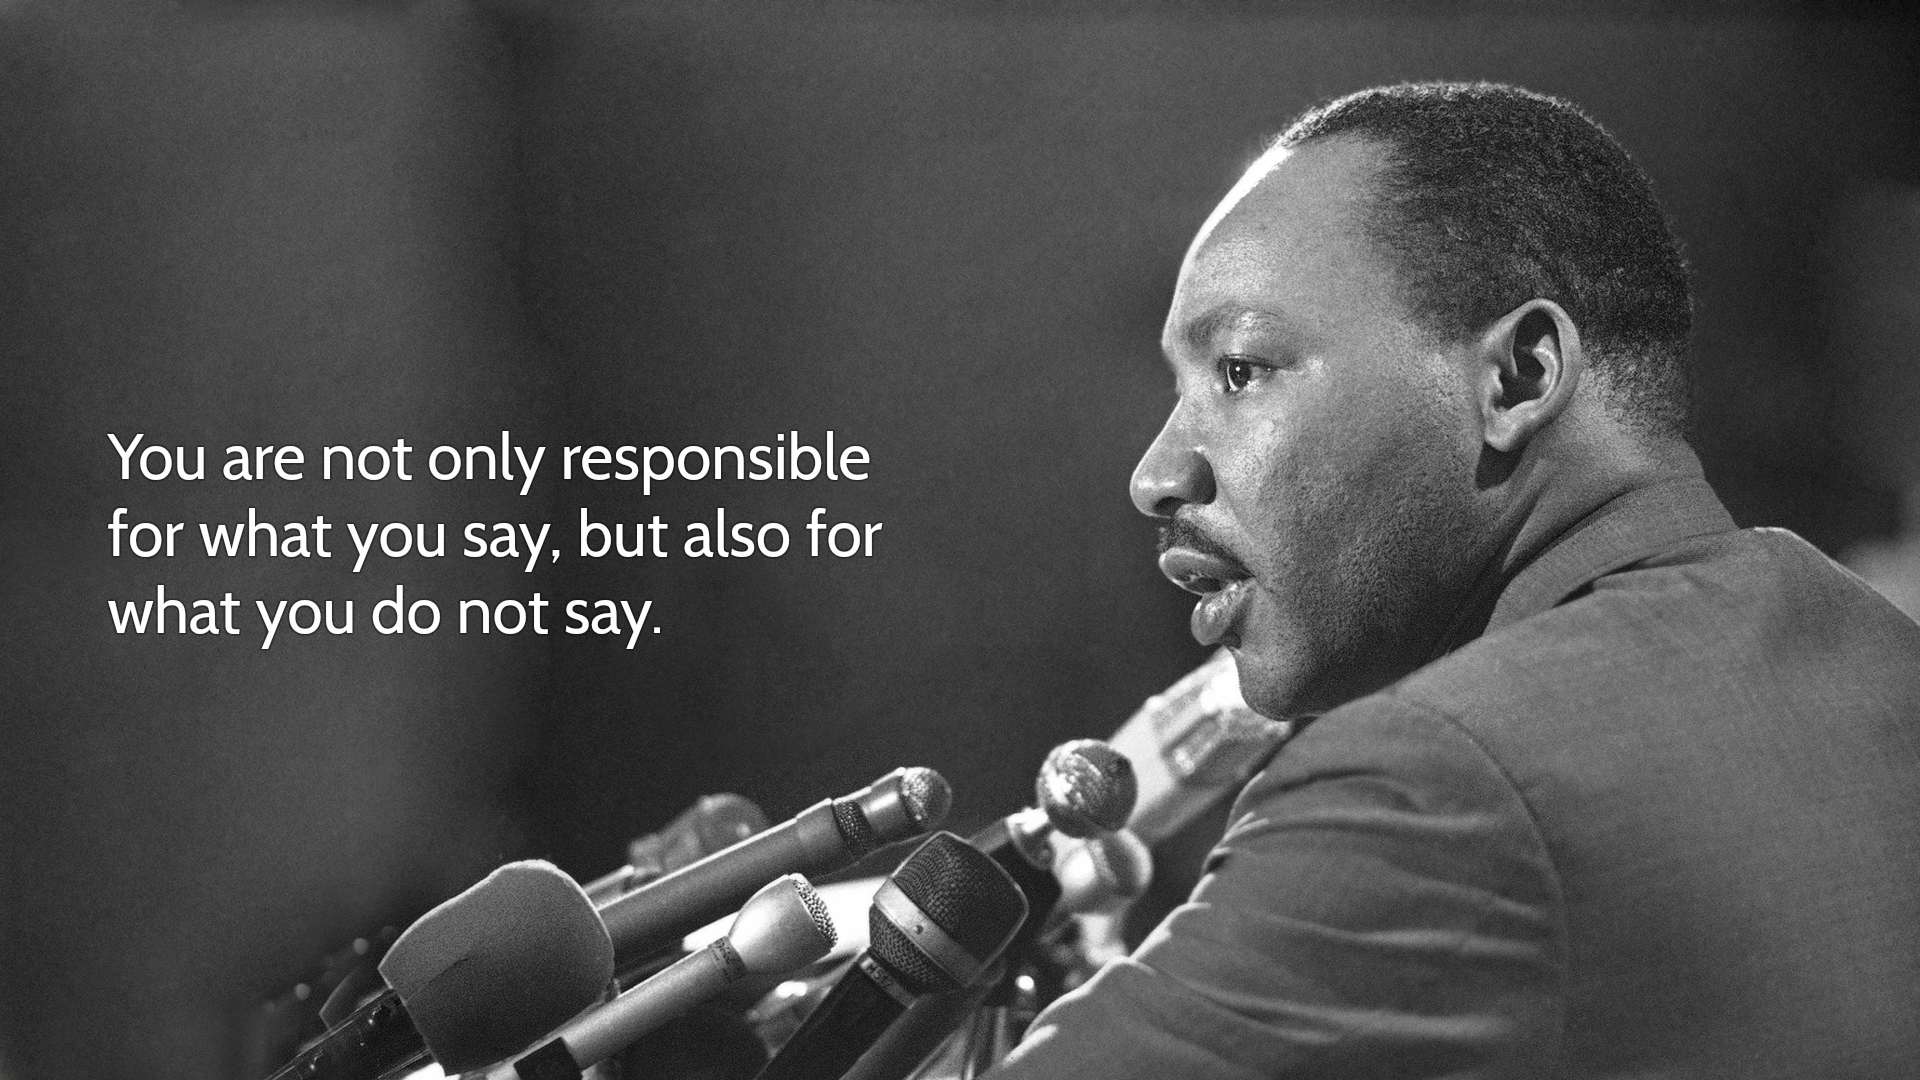 Martin Luther King Quotes